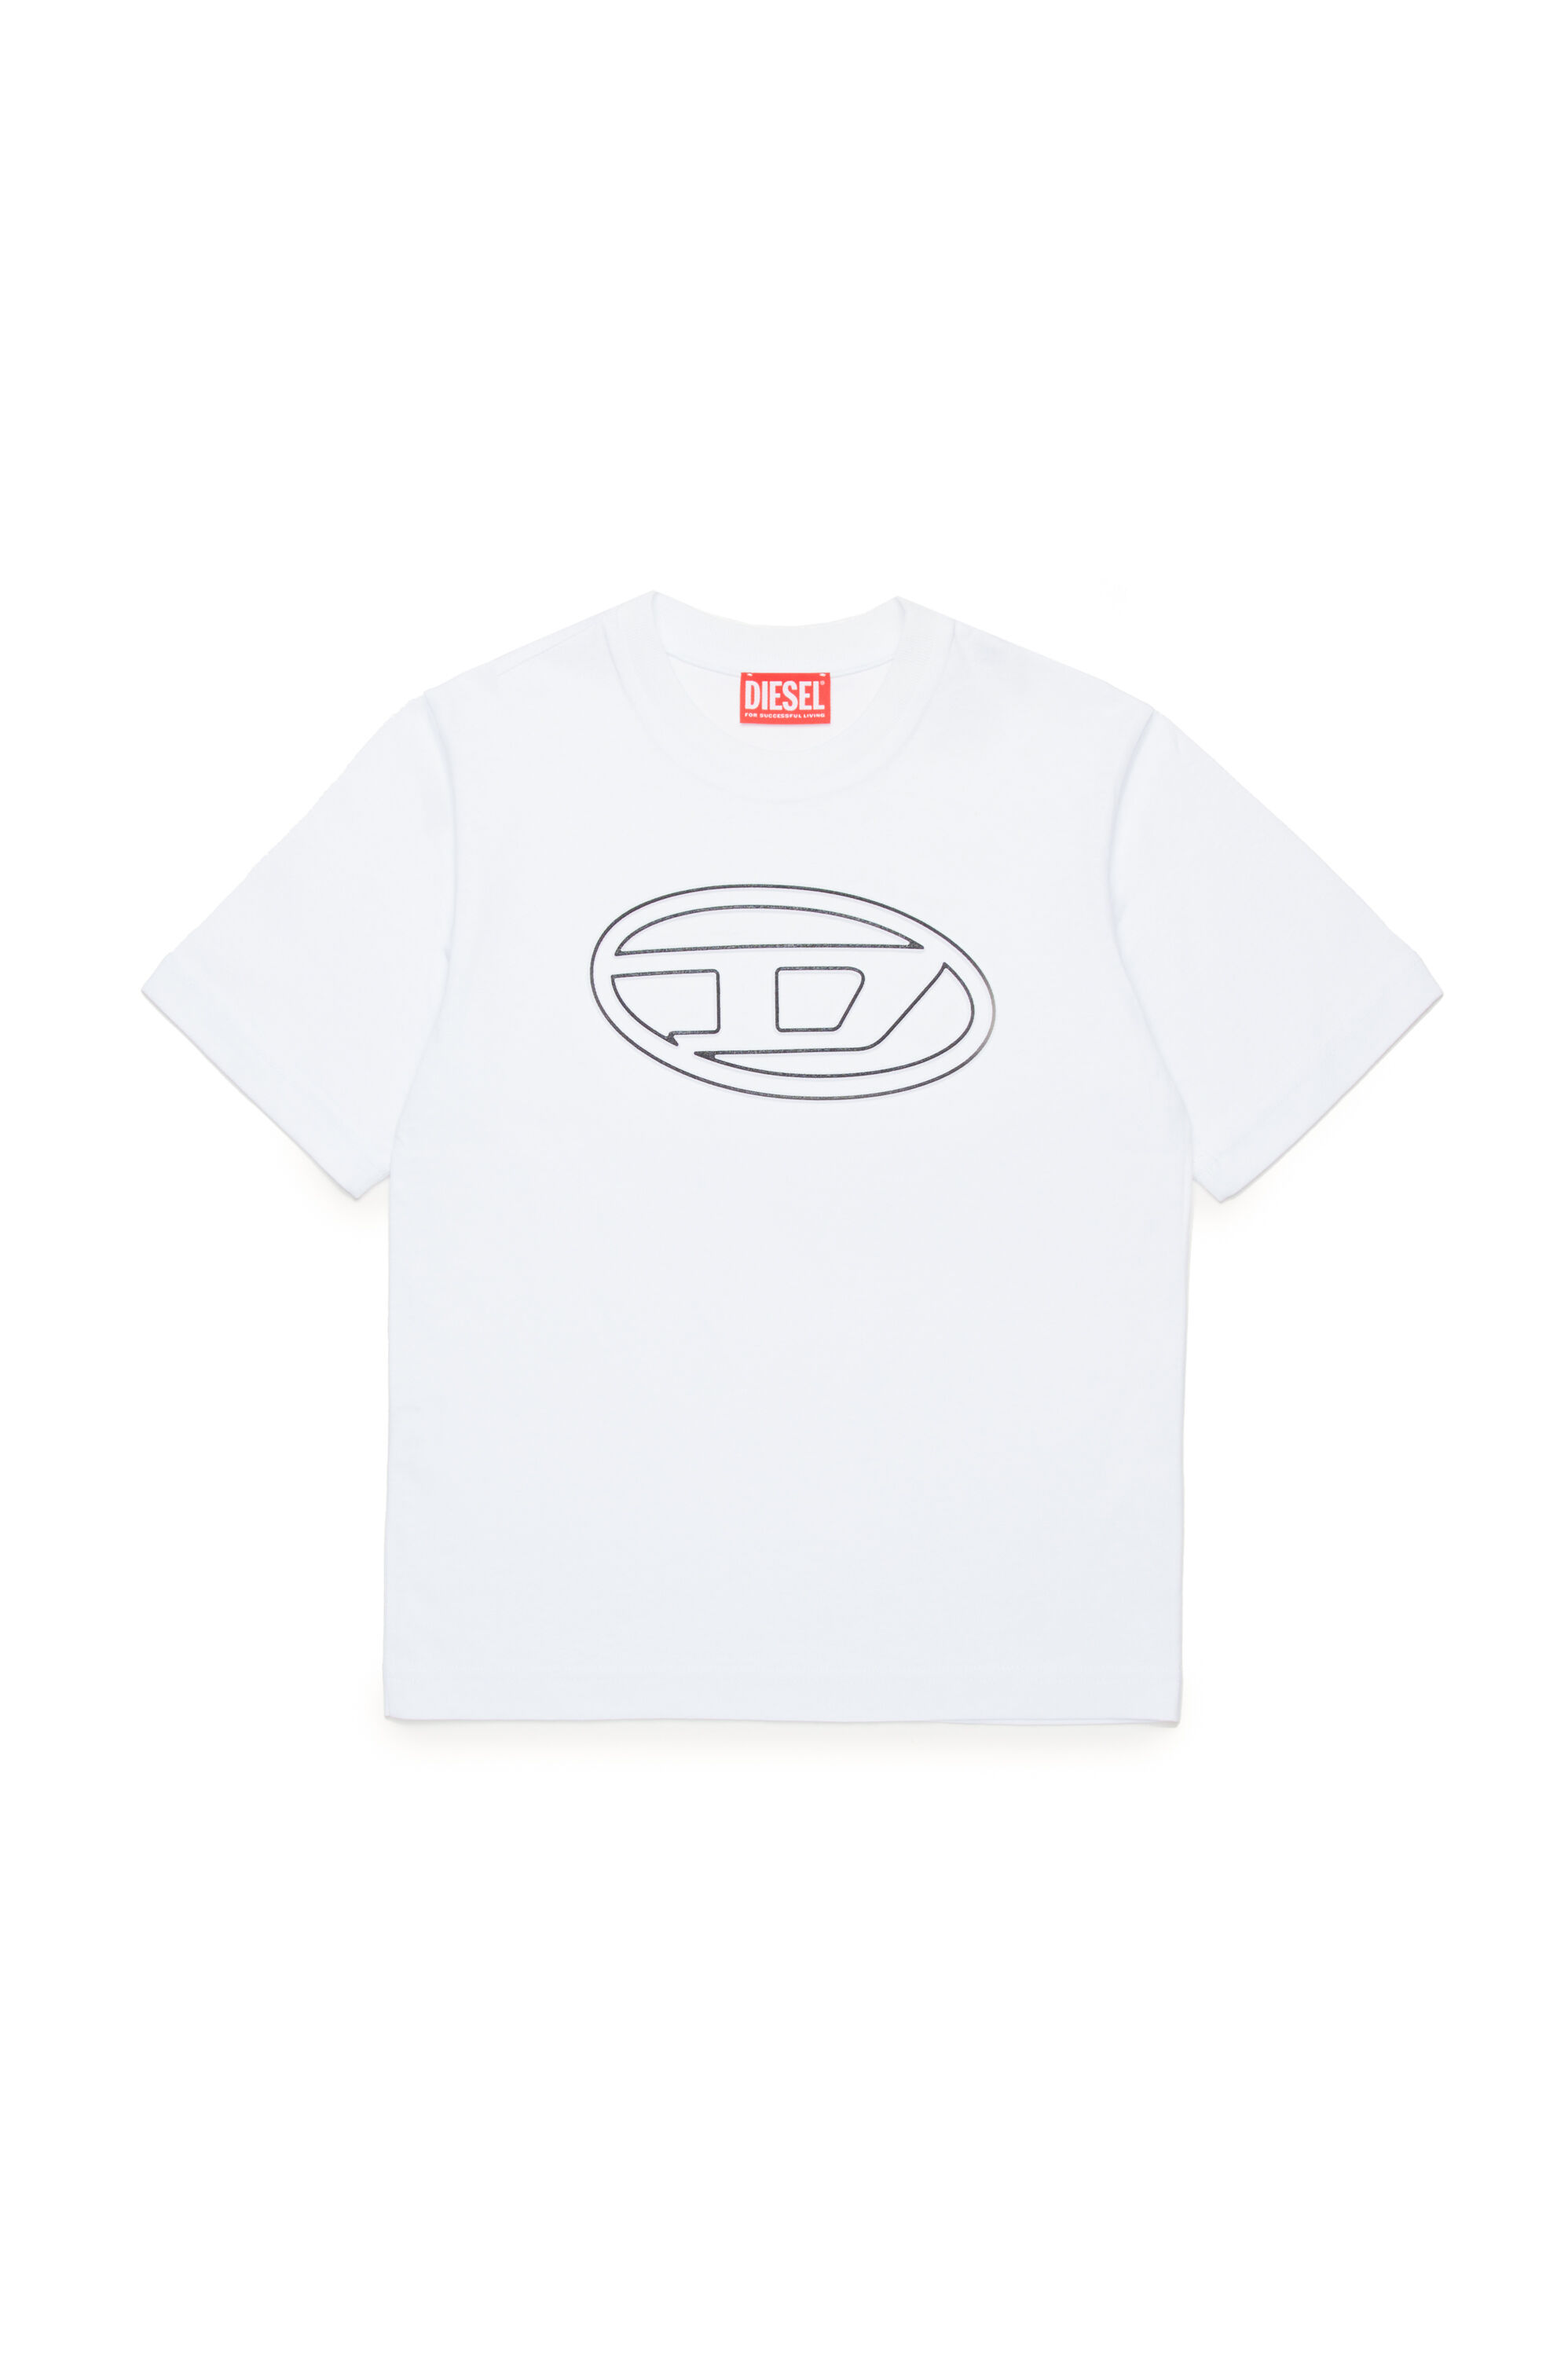 TJUSTBIGOVAL OVER T-shirt with Oval D outline logo｜ホワイト 